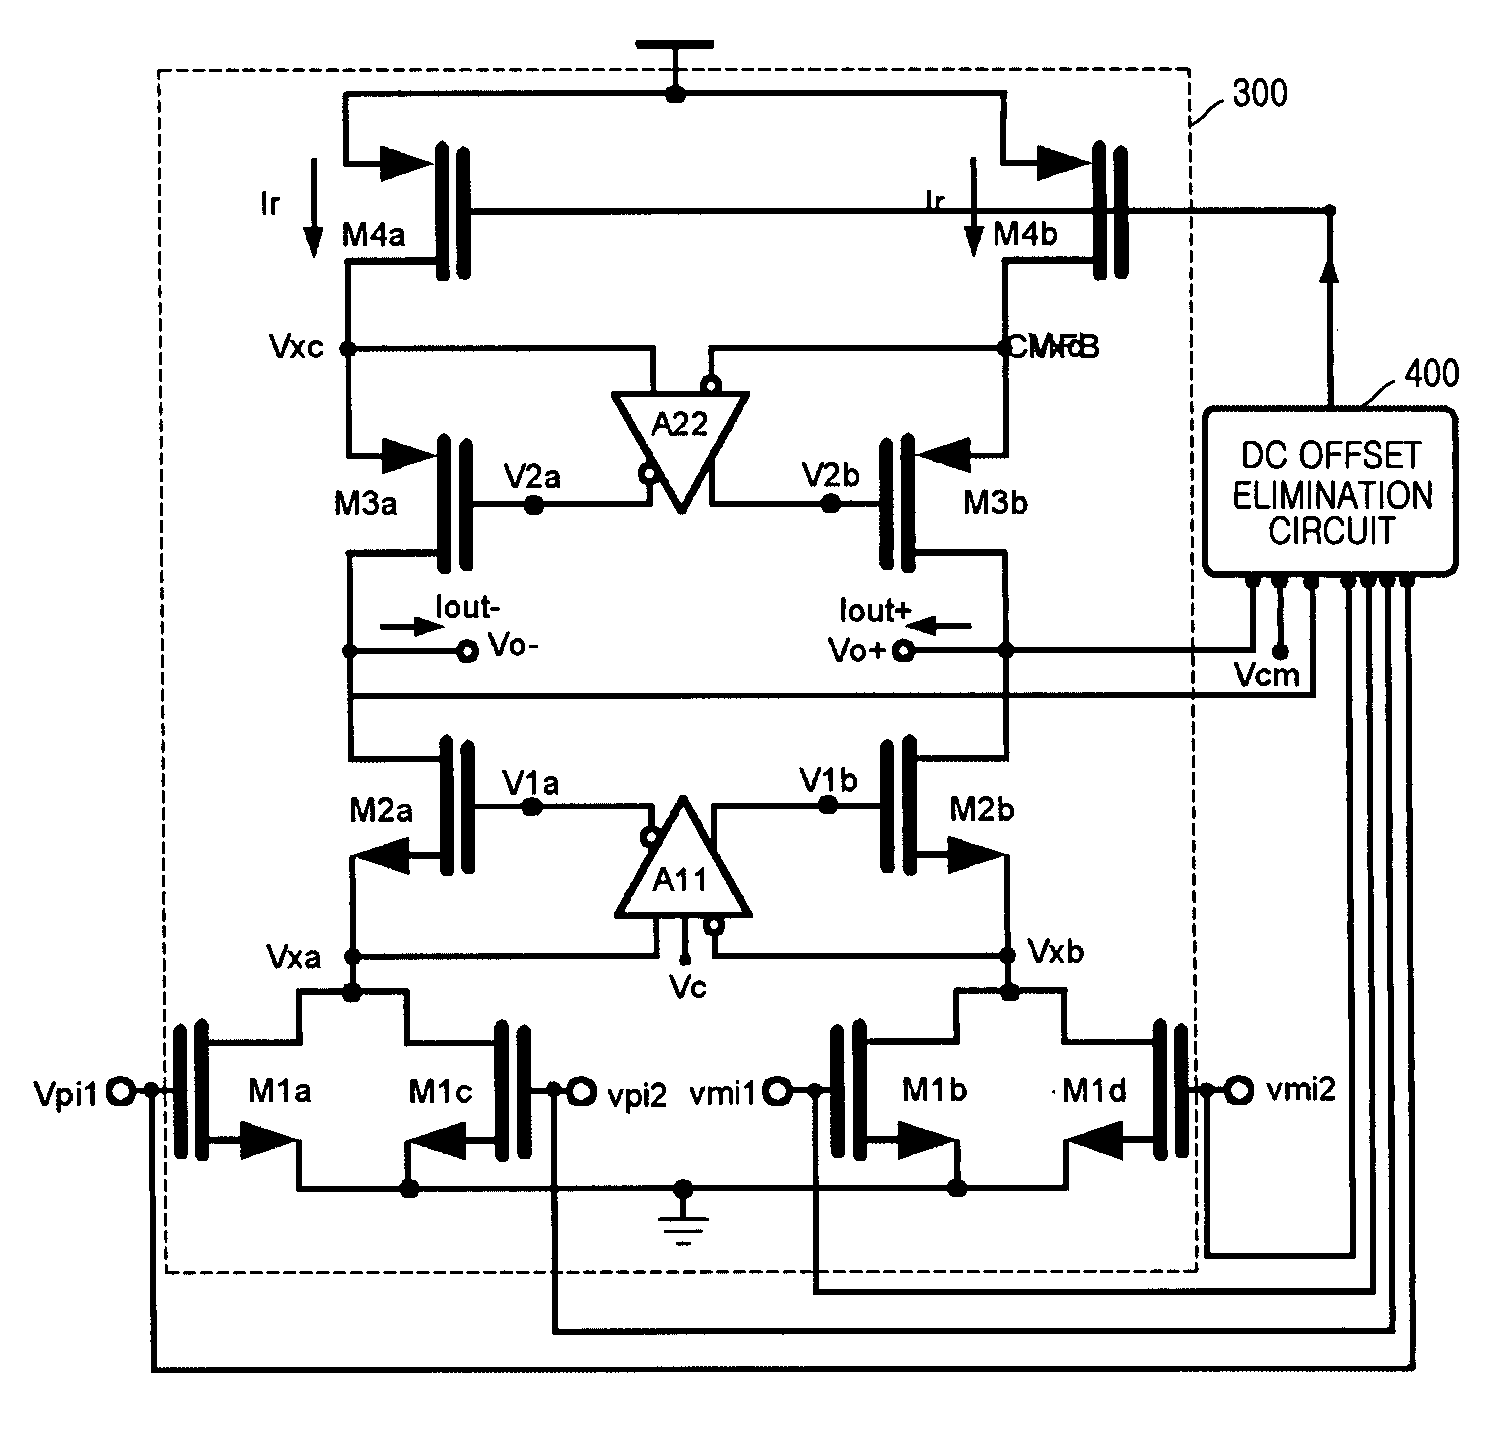 Operational transconductance amplifier with DC offset elimination and low mismatch